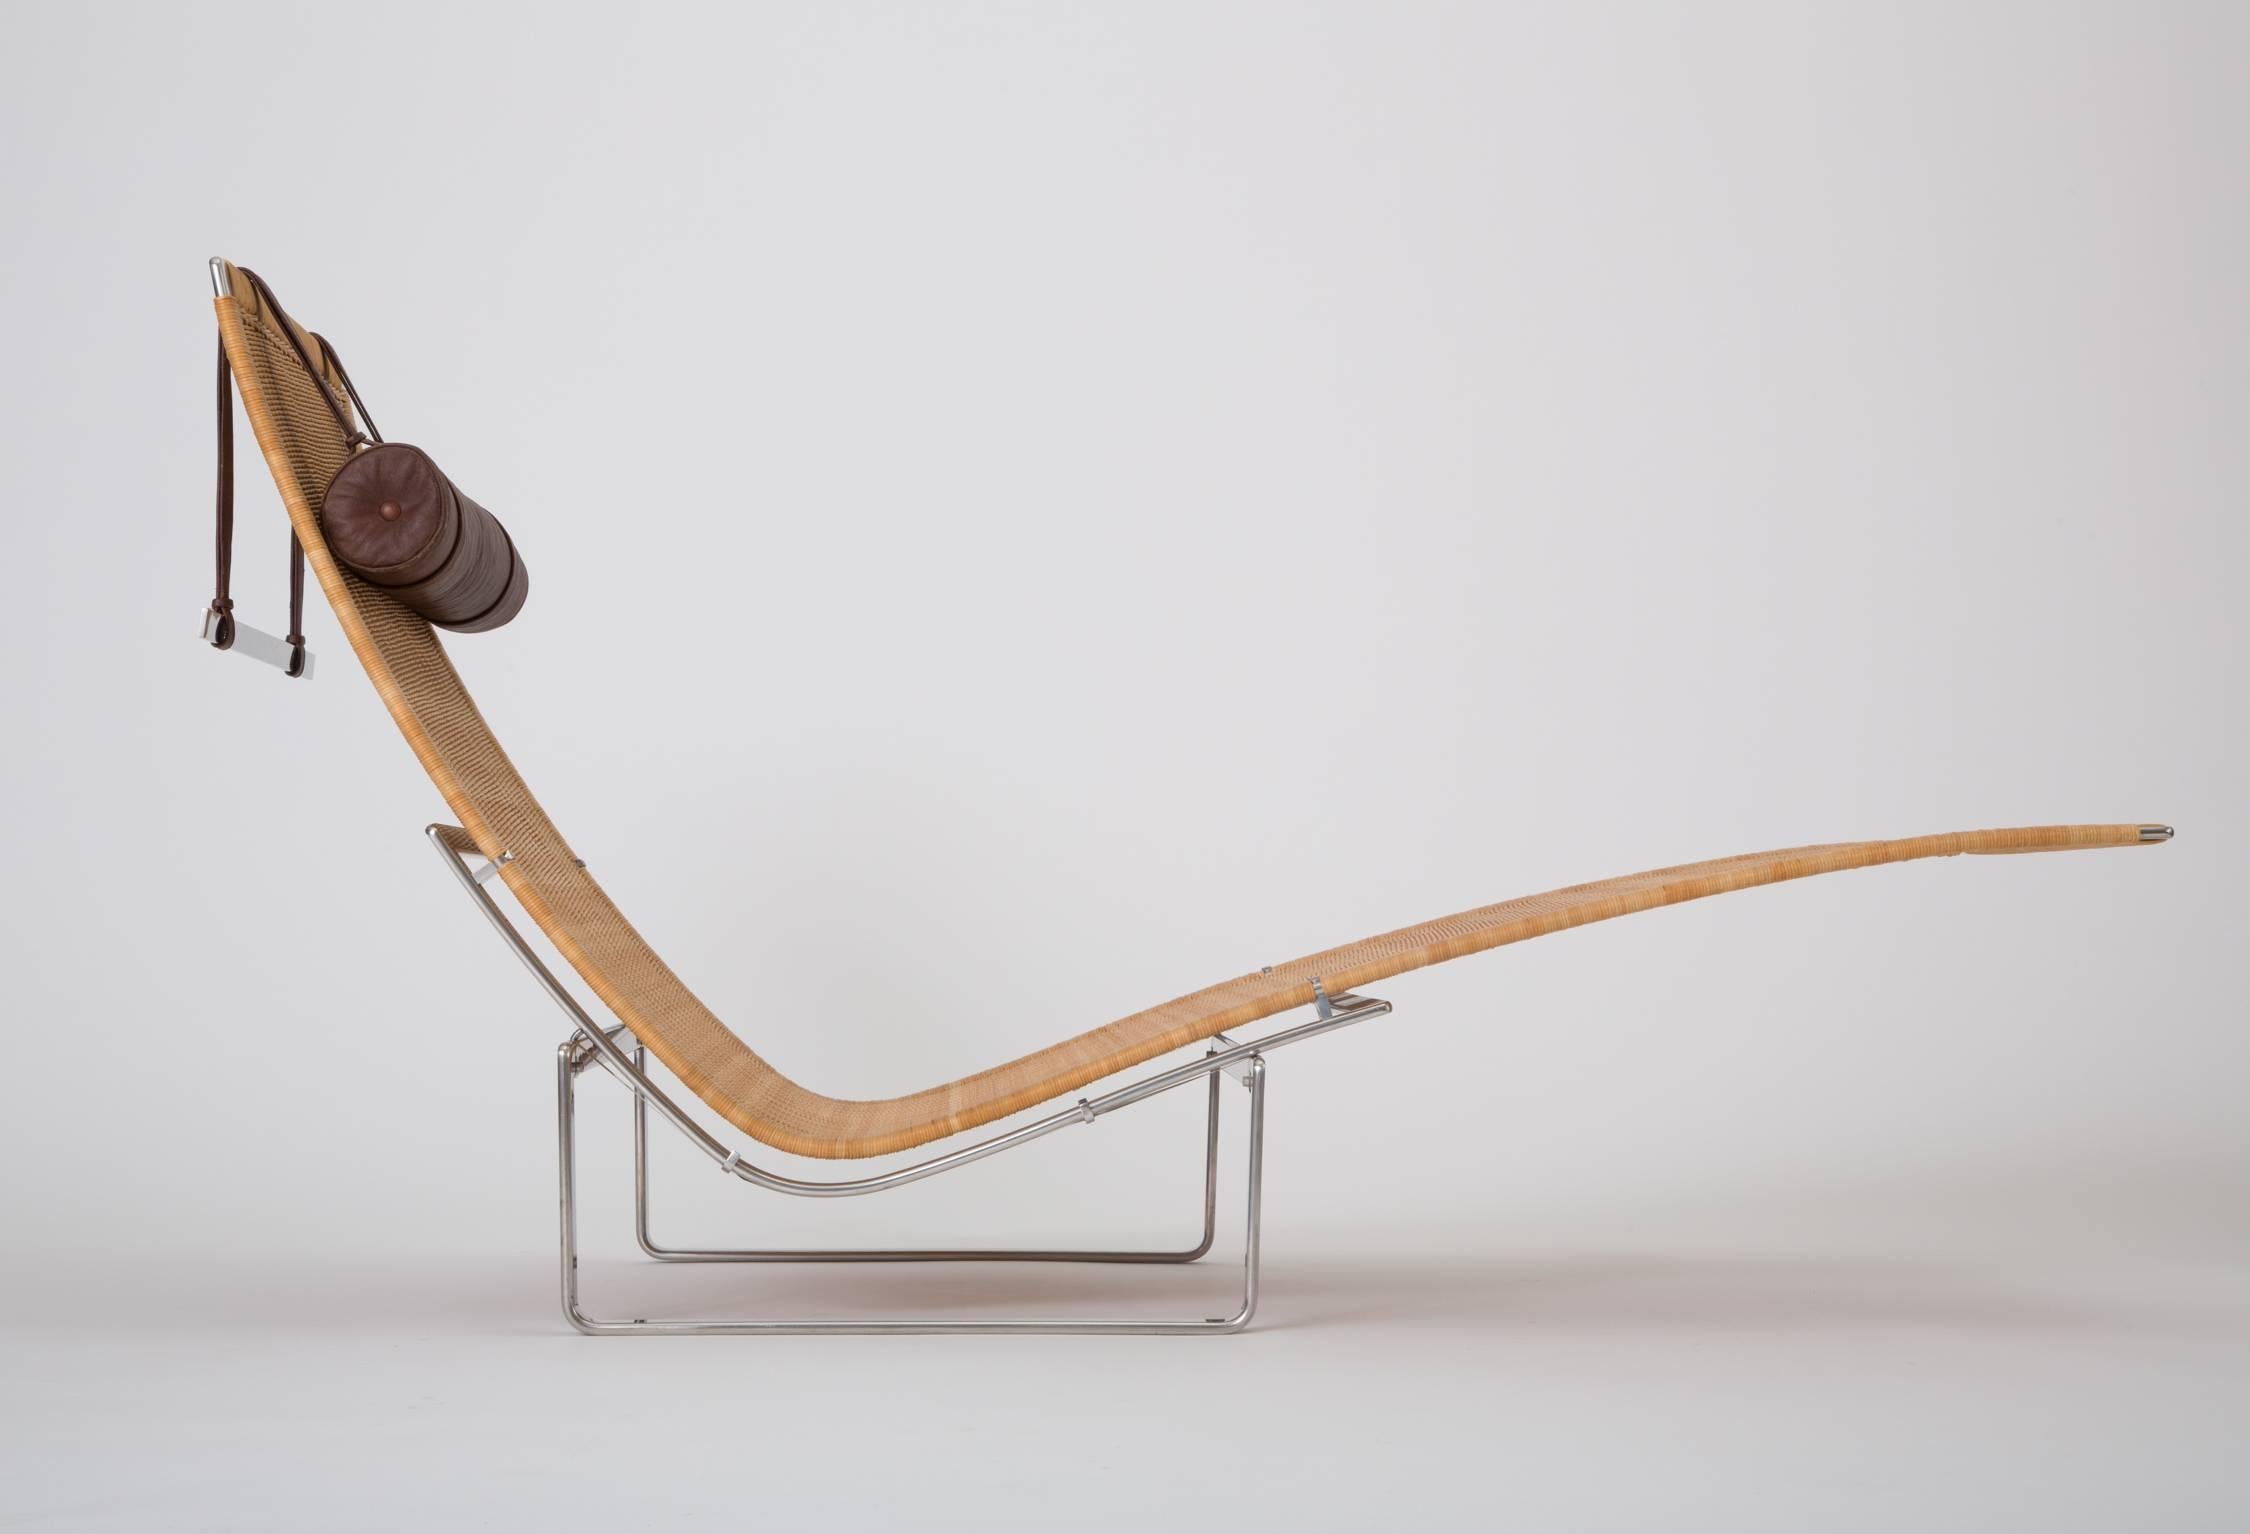 Designed in 1965 for E. Kold Christensen, the PK 24 chaise lounge is one of Poul Kjærholm’s most ambitious designs. A curved seat of exaggerated length is suspended between the two support bars of the polished frame on steel ribbons. The chair seat